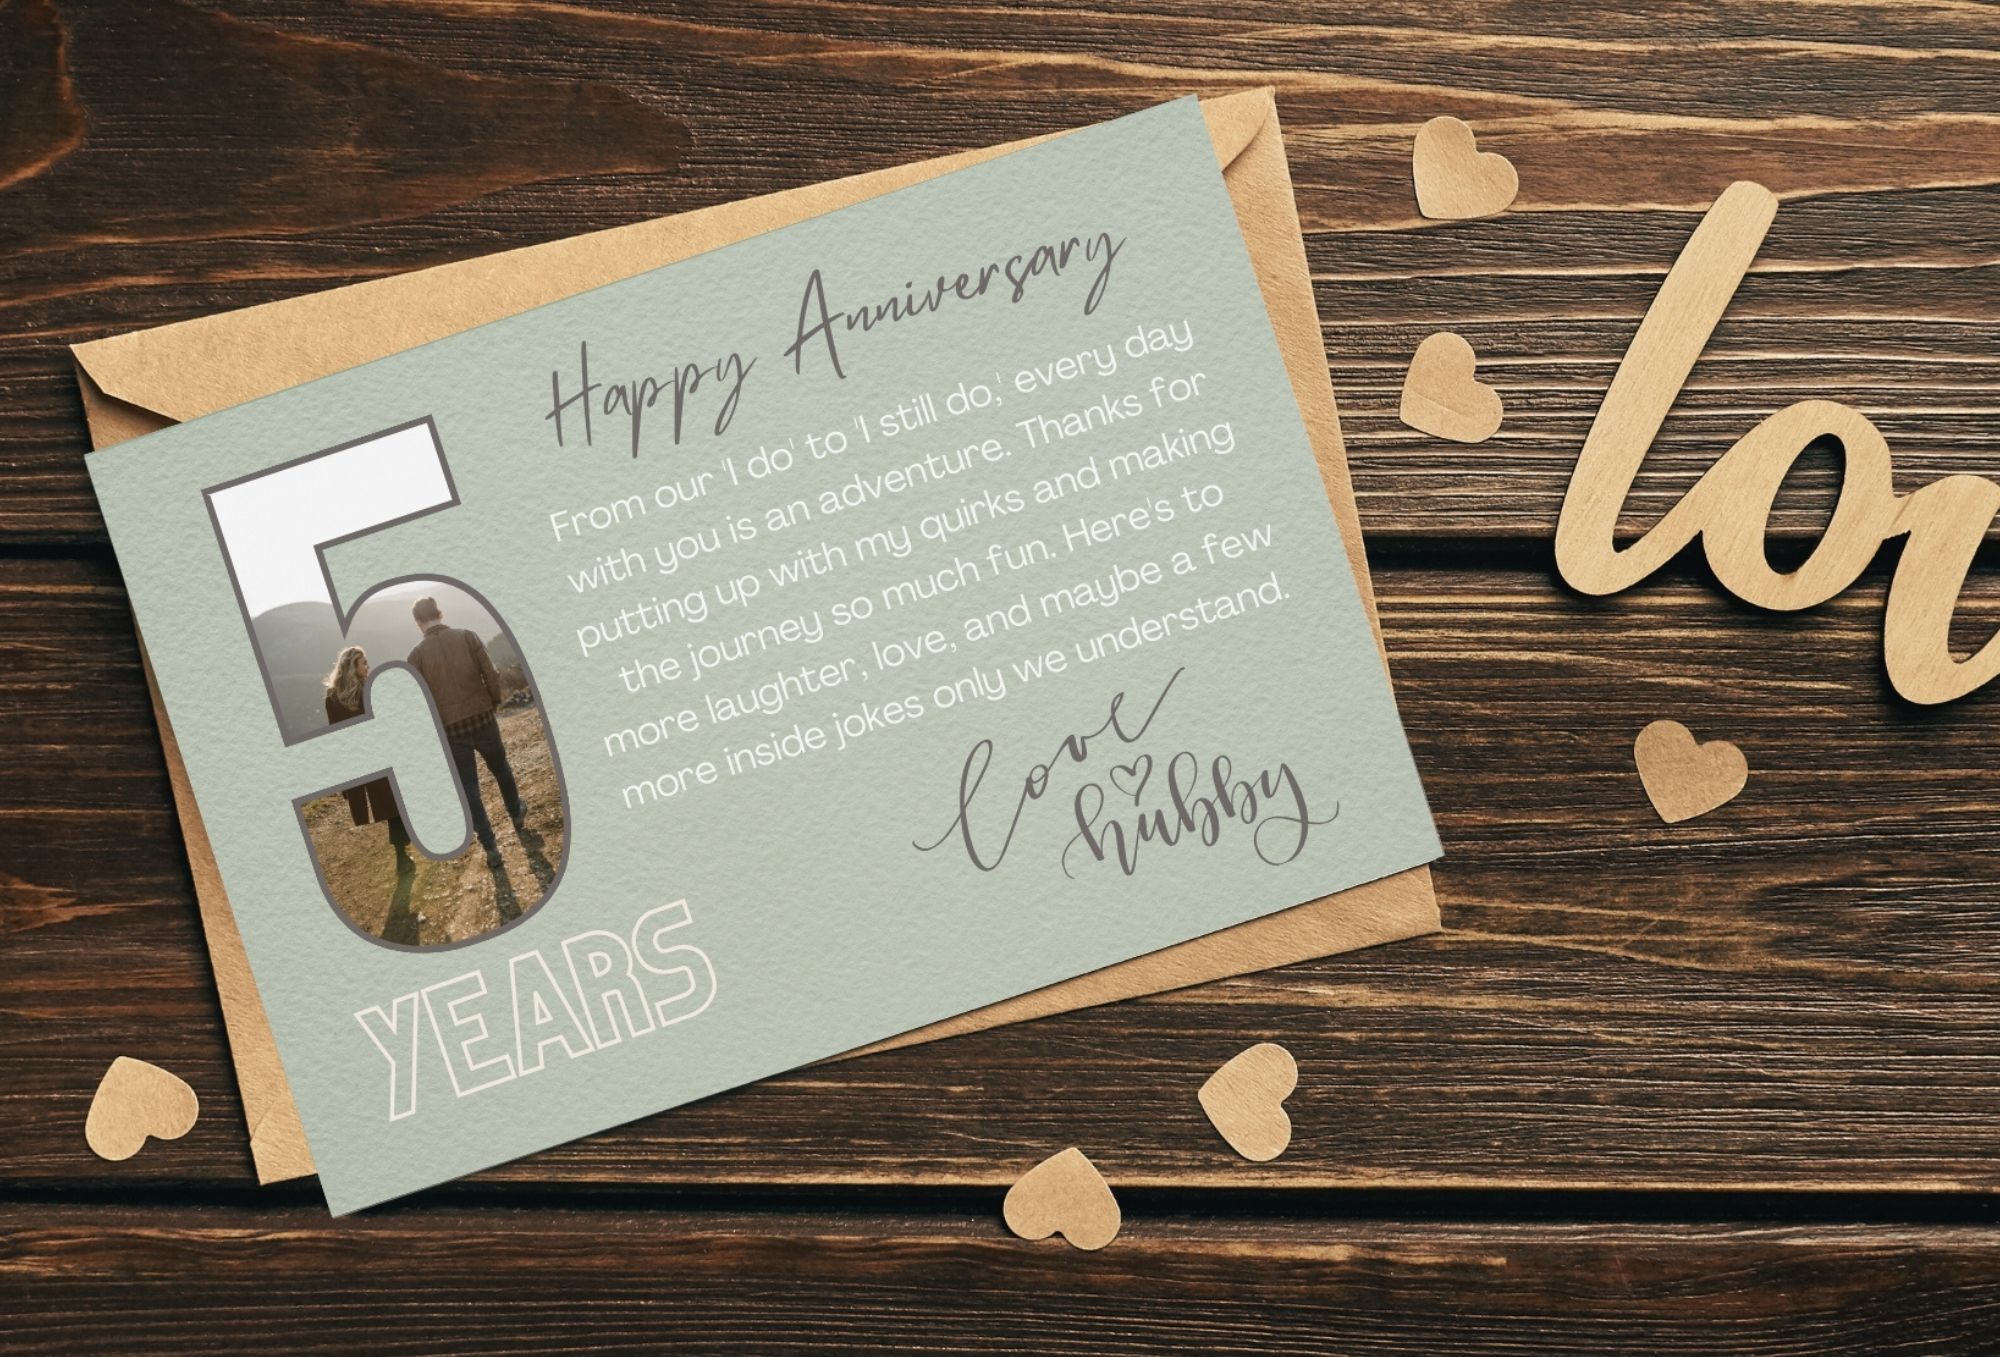 Happy anniversary greeting card with envelope on a dark wood table with brown heart cutouts.